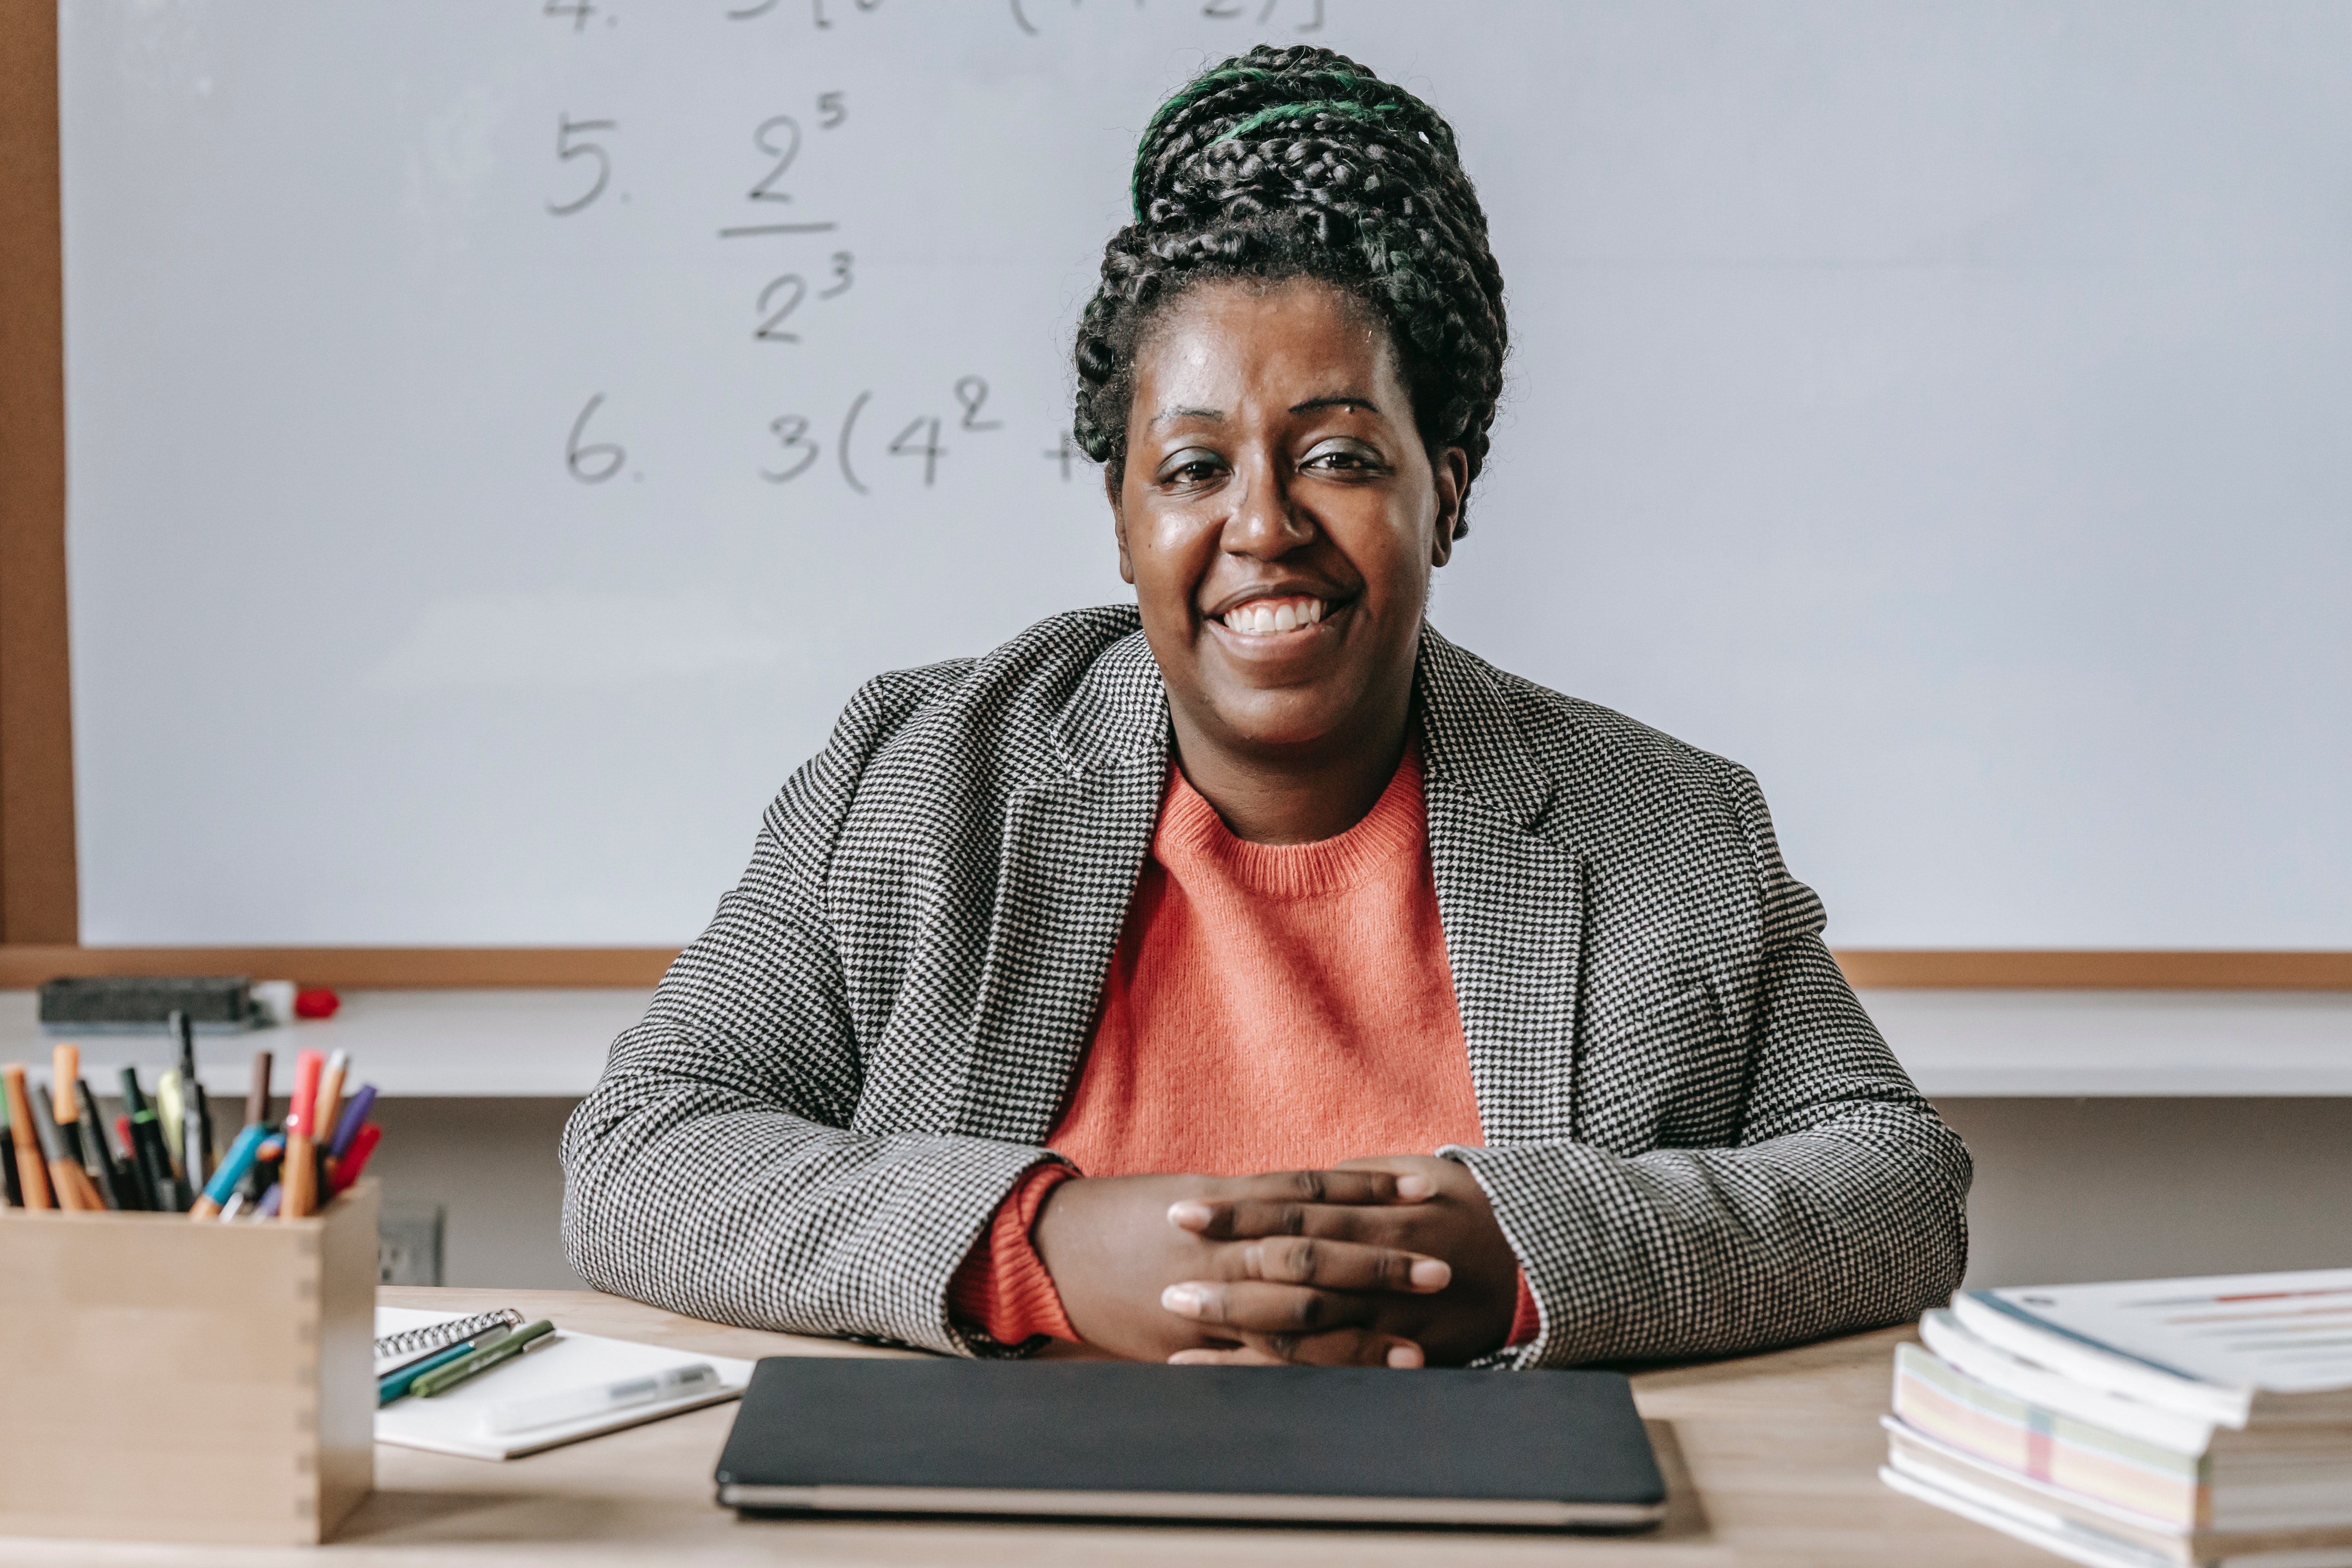 A black math teacher smiles in front of a whiteboard